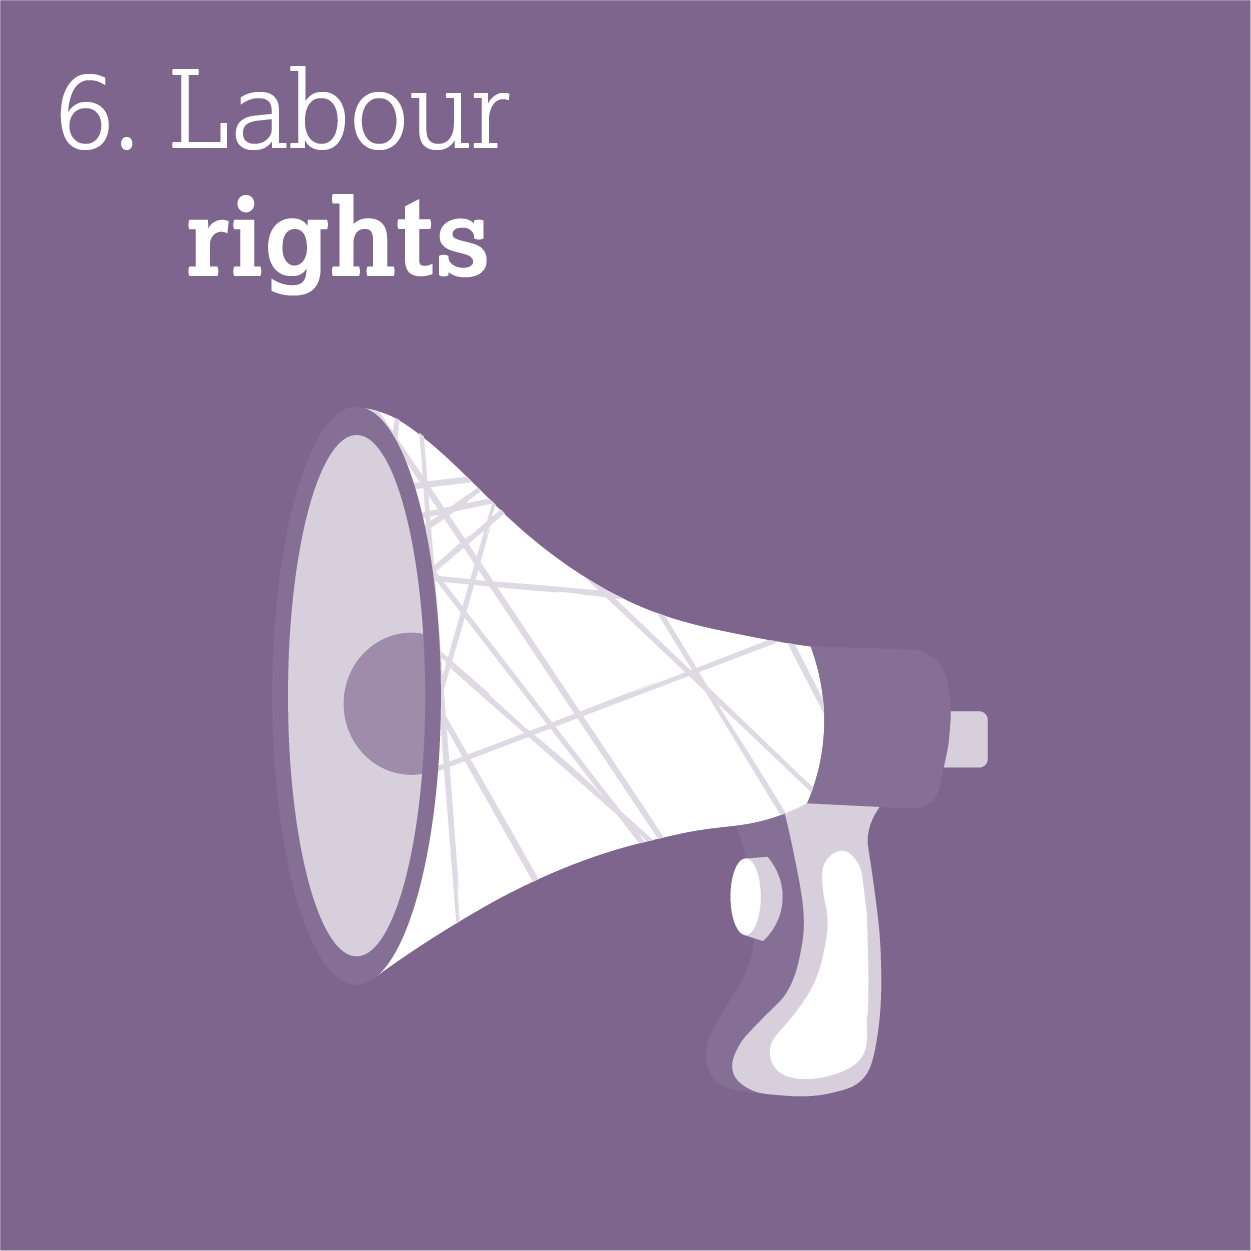 6. Labour rights